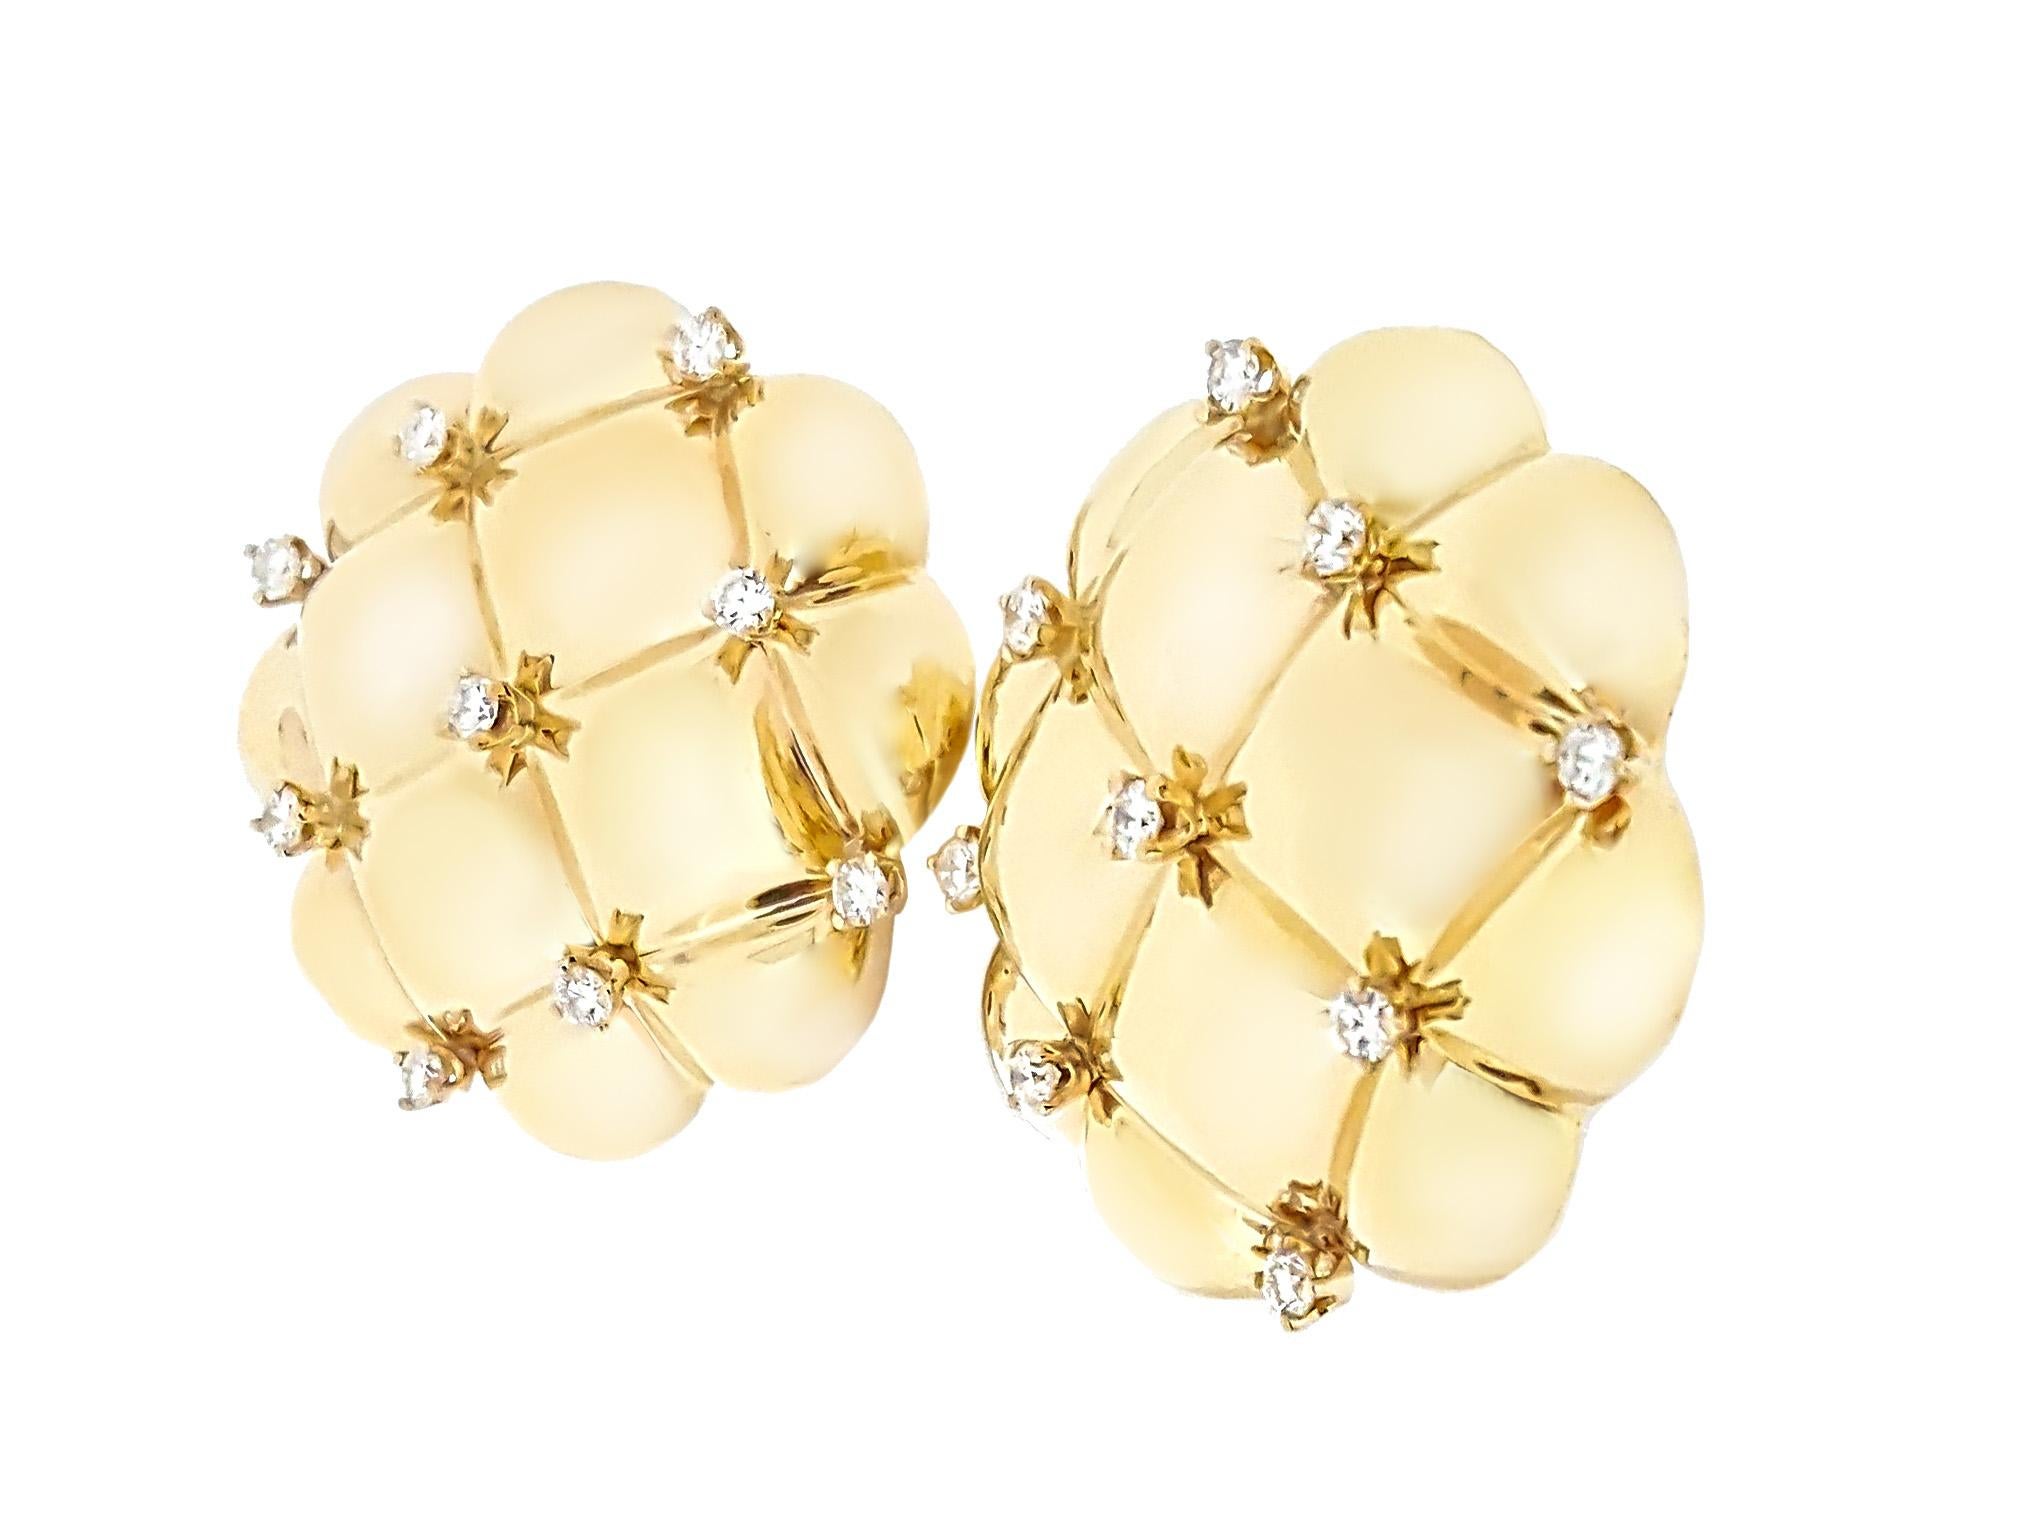 Beautiful and dimensional quilted pattern earrings with .90ctw of full cut round brilliant diamond accents set in high polished 14kt yellow gold. 
Earrings are approximately 1.5 inches wide and are clip on.  
Straight posts for pierced ears can be